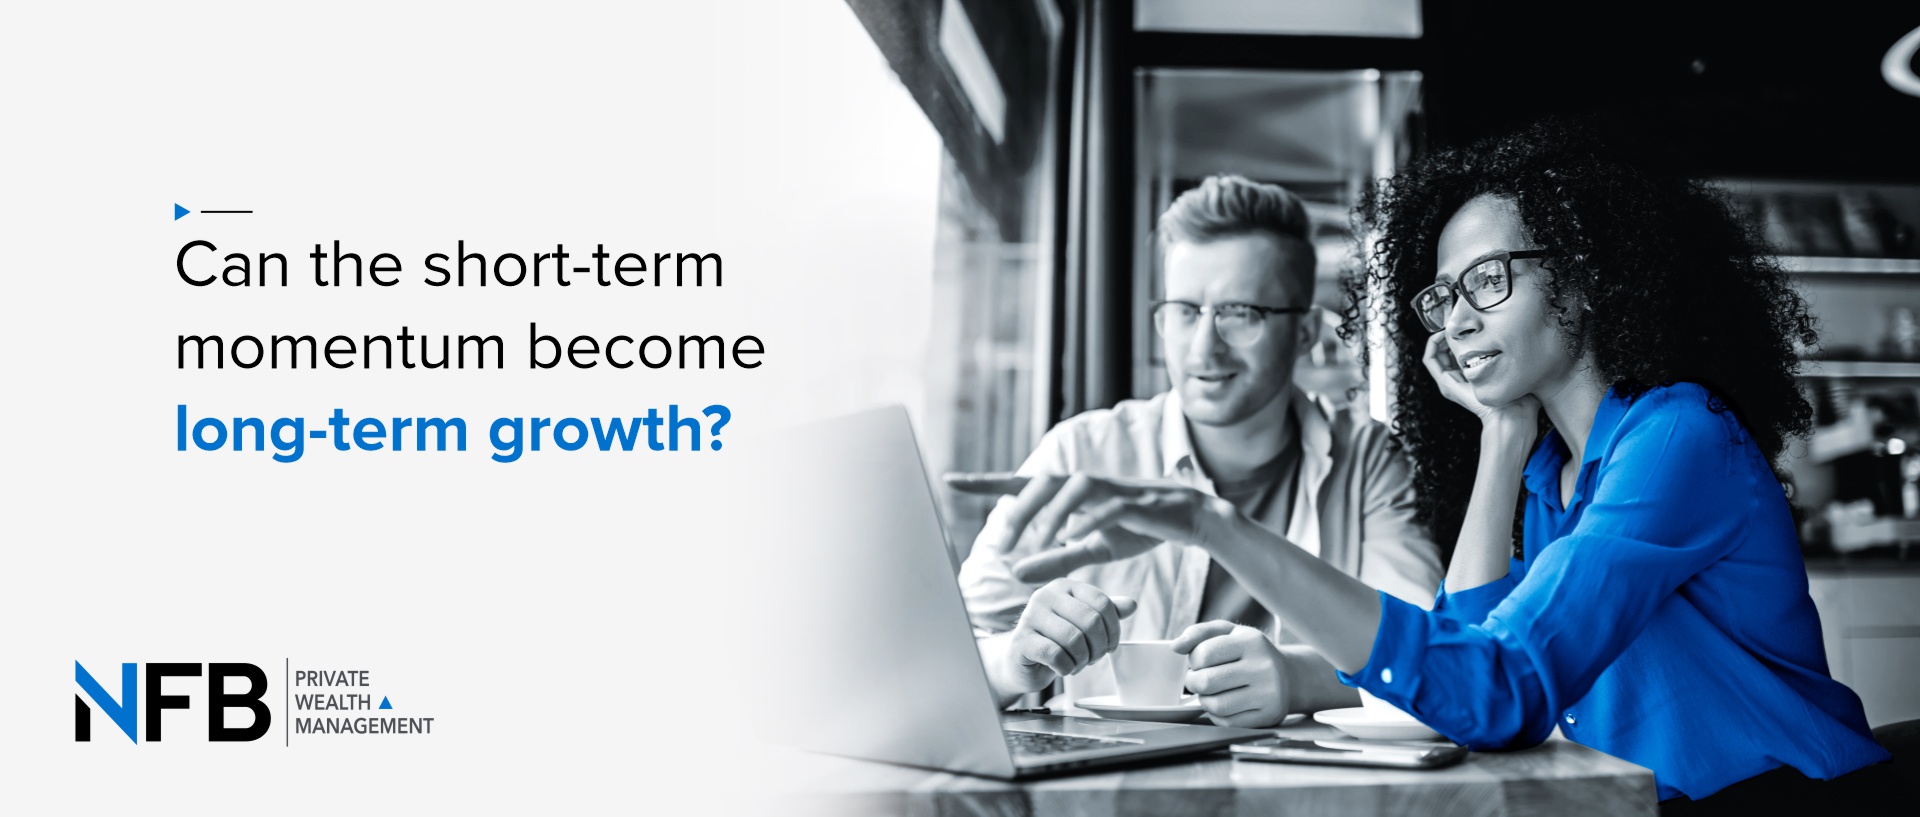 Can the short-term momentum become long-term growth?